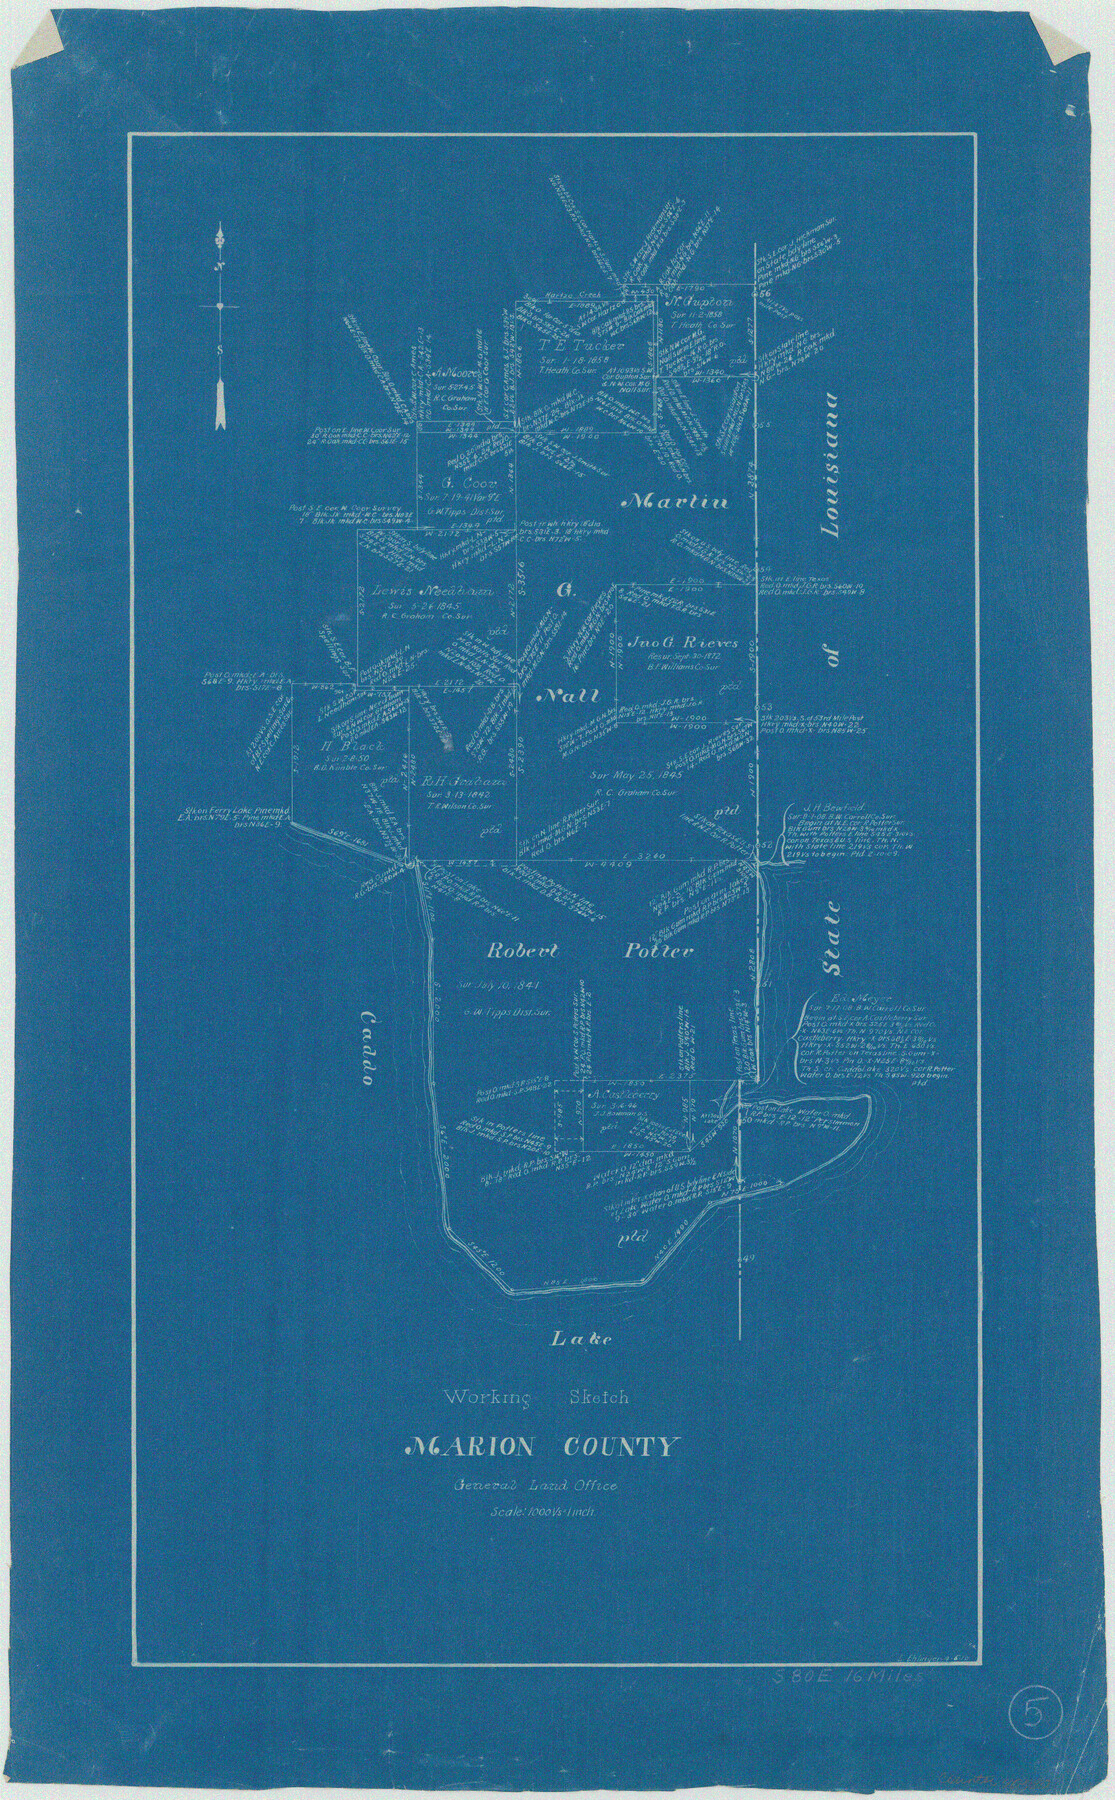 70780, Marion County Working Sketch 5, General Map Collection